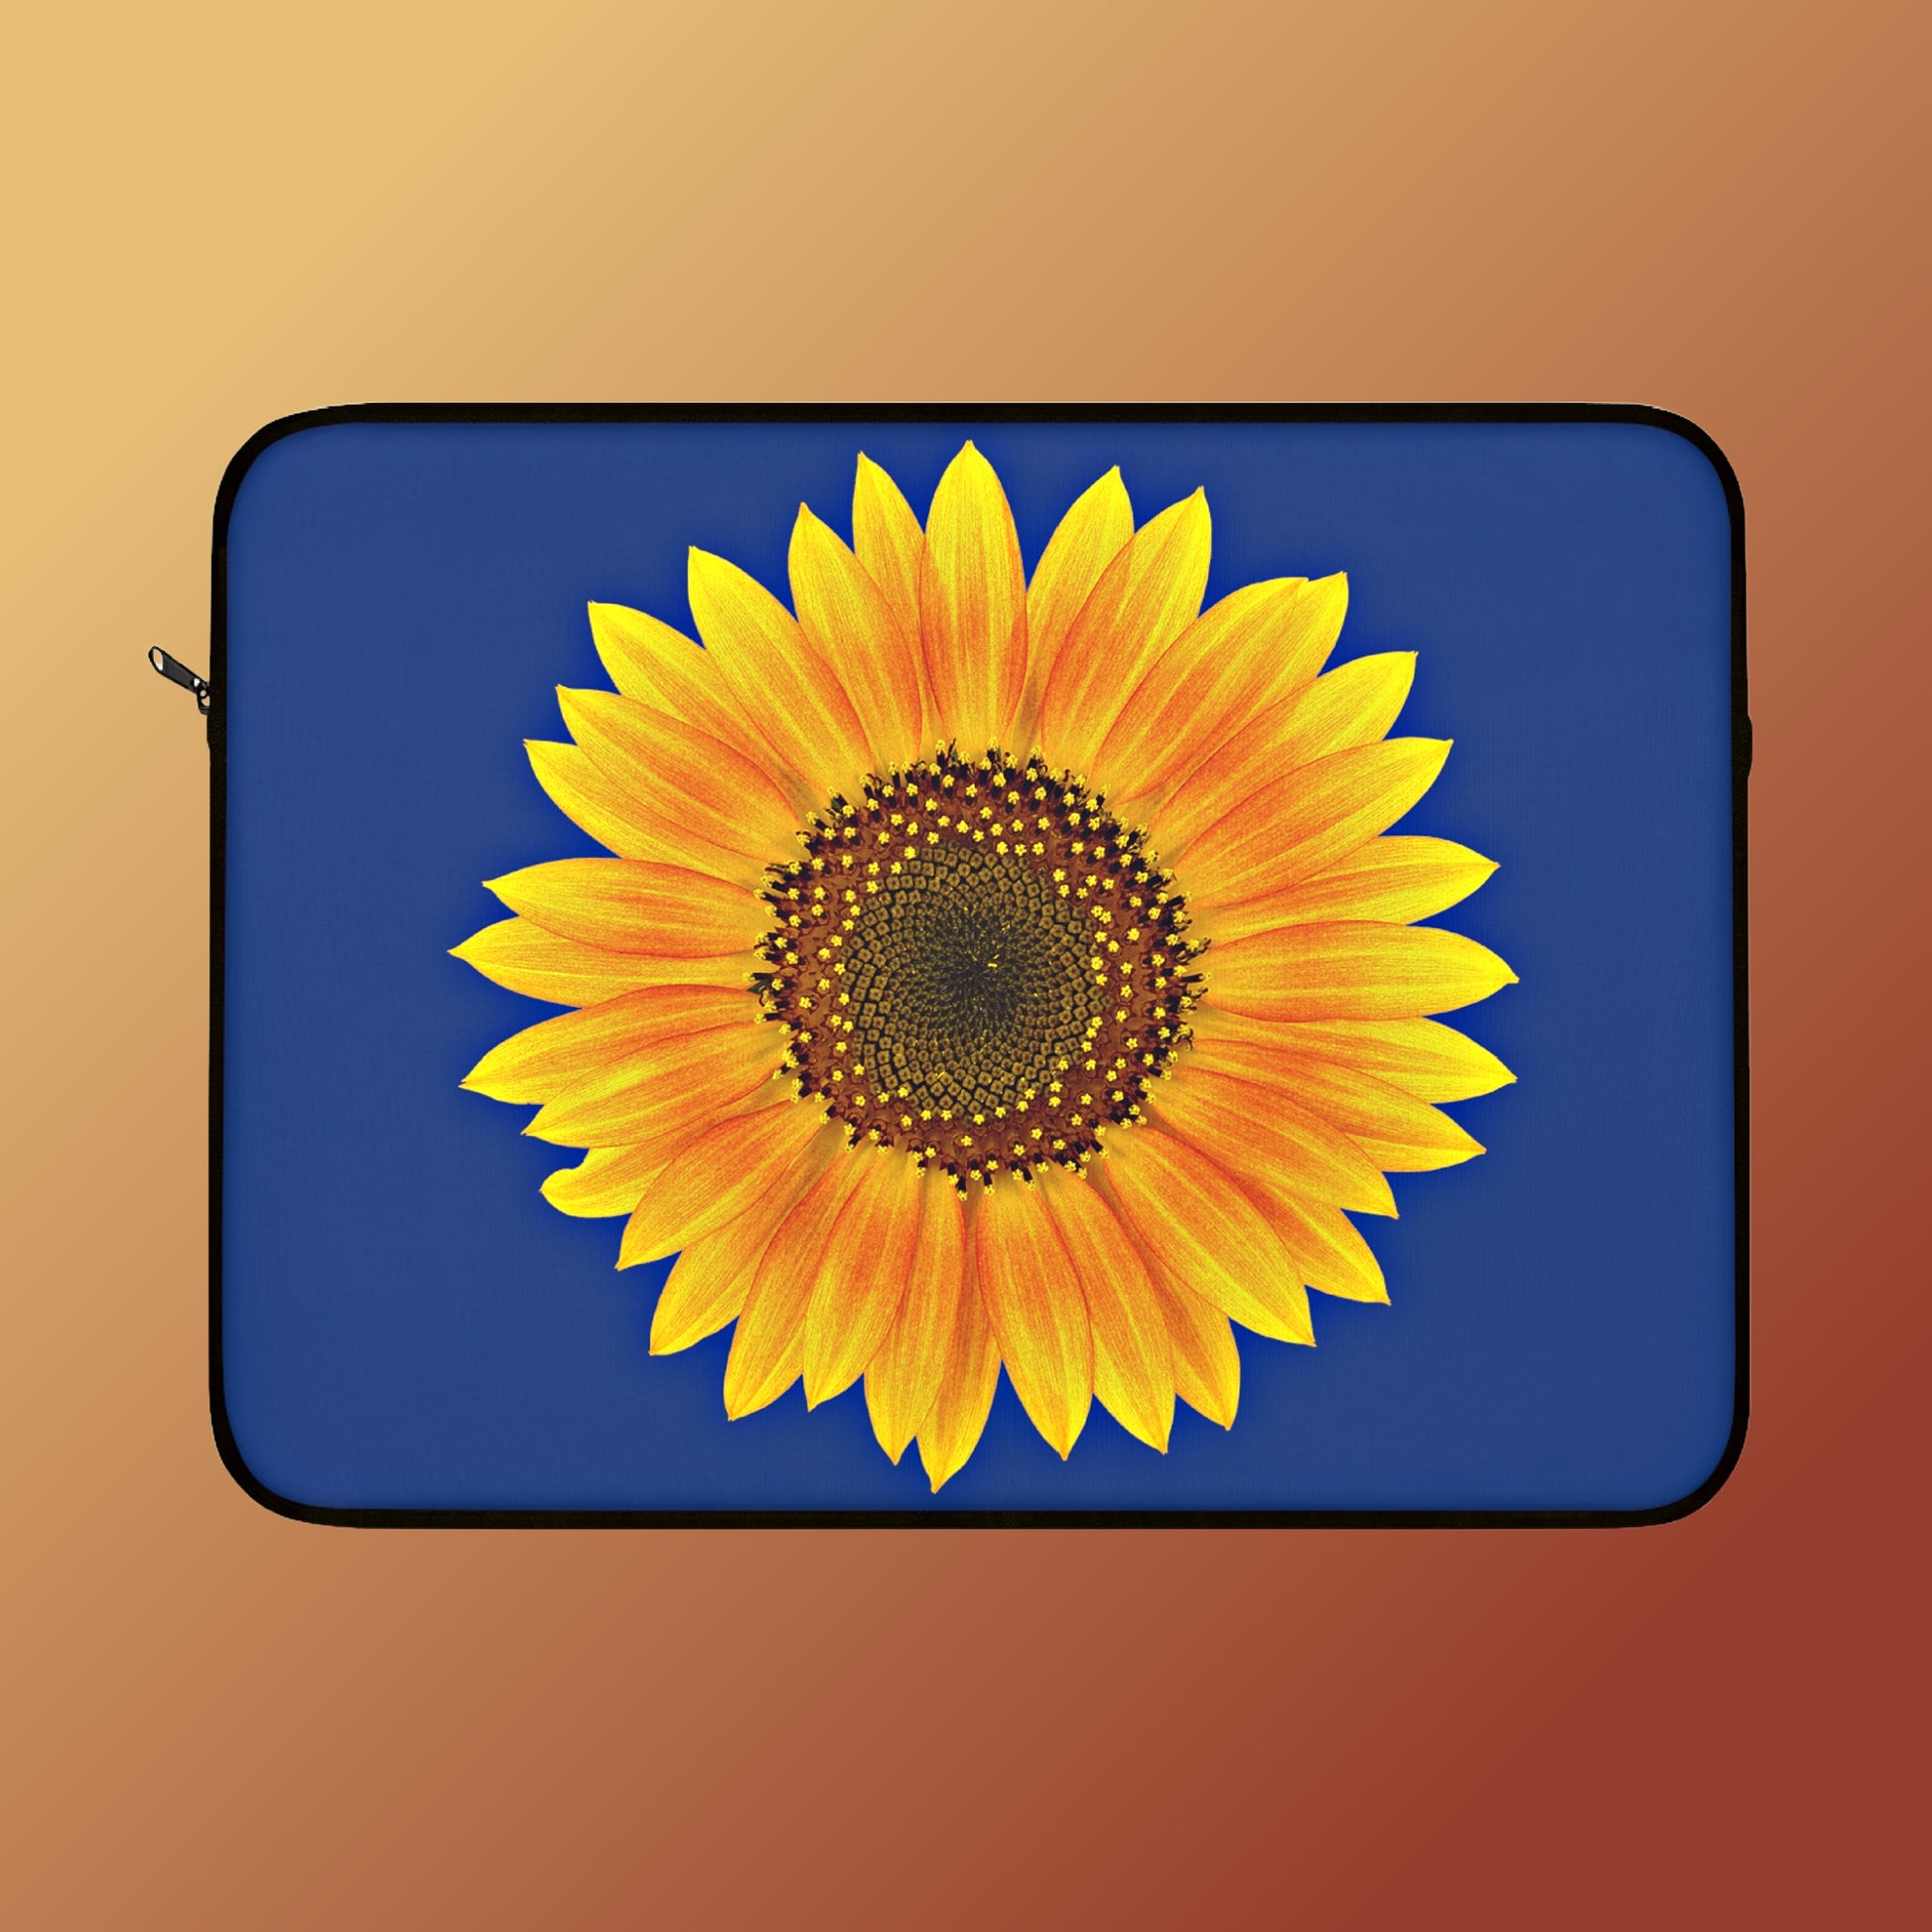 Mock up of the laptop sleeve against a brown background